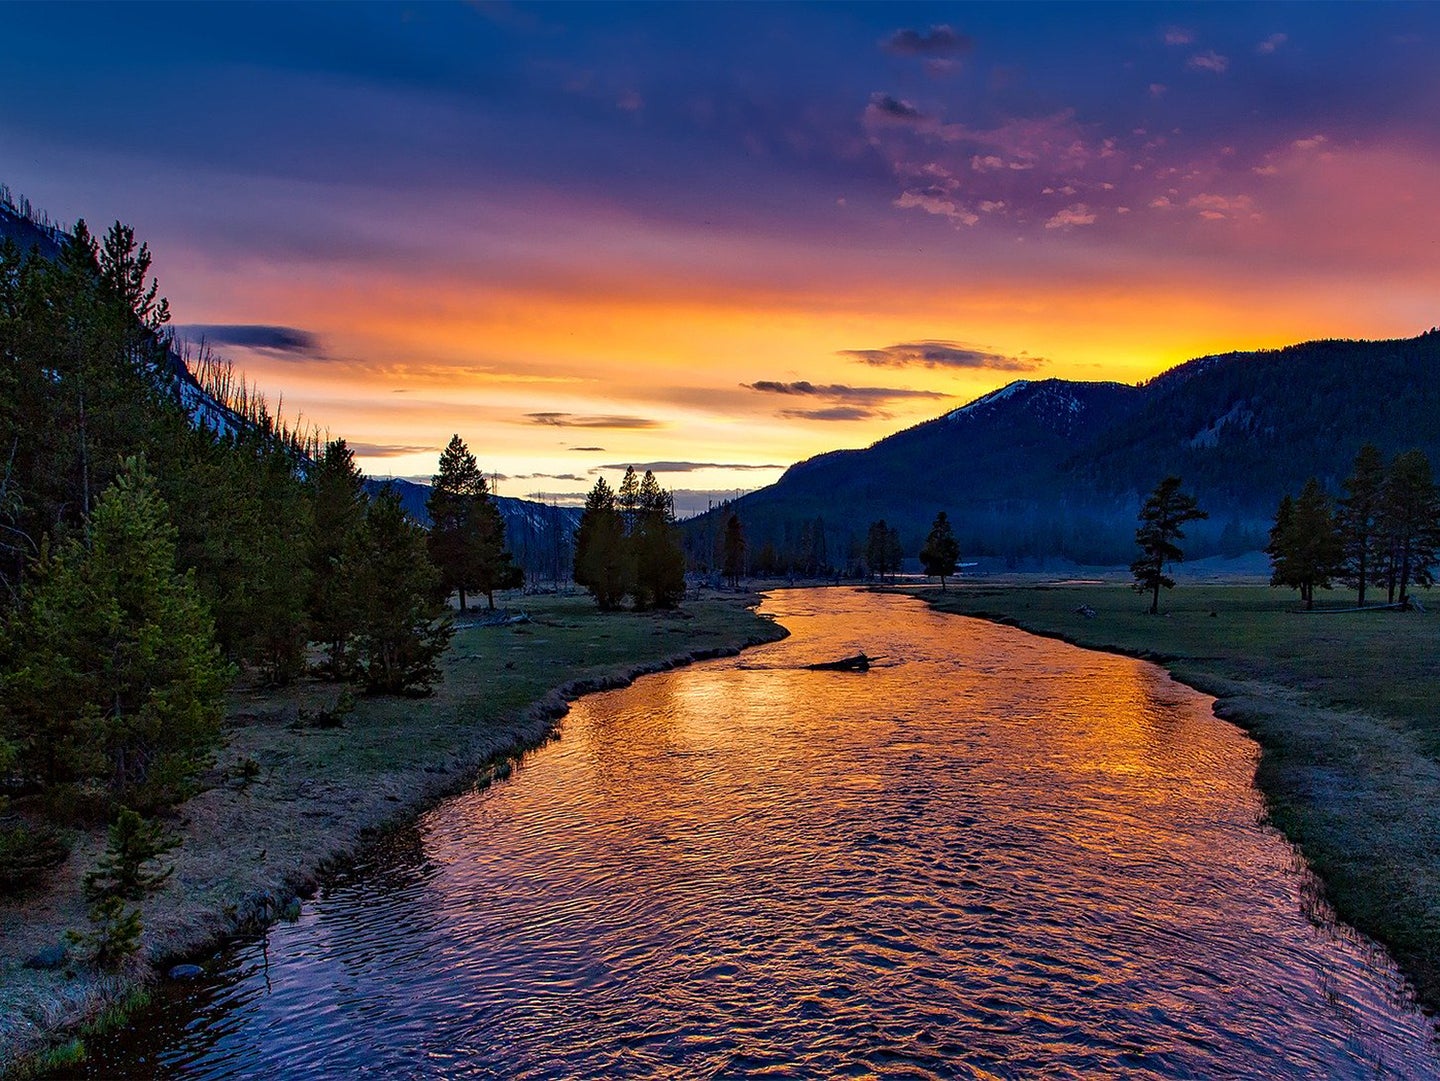 A sunset overlooking the Yellowstone River in Yellowstone National Park.